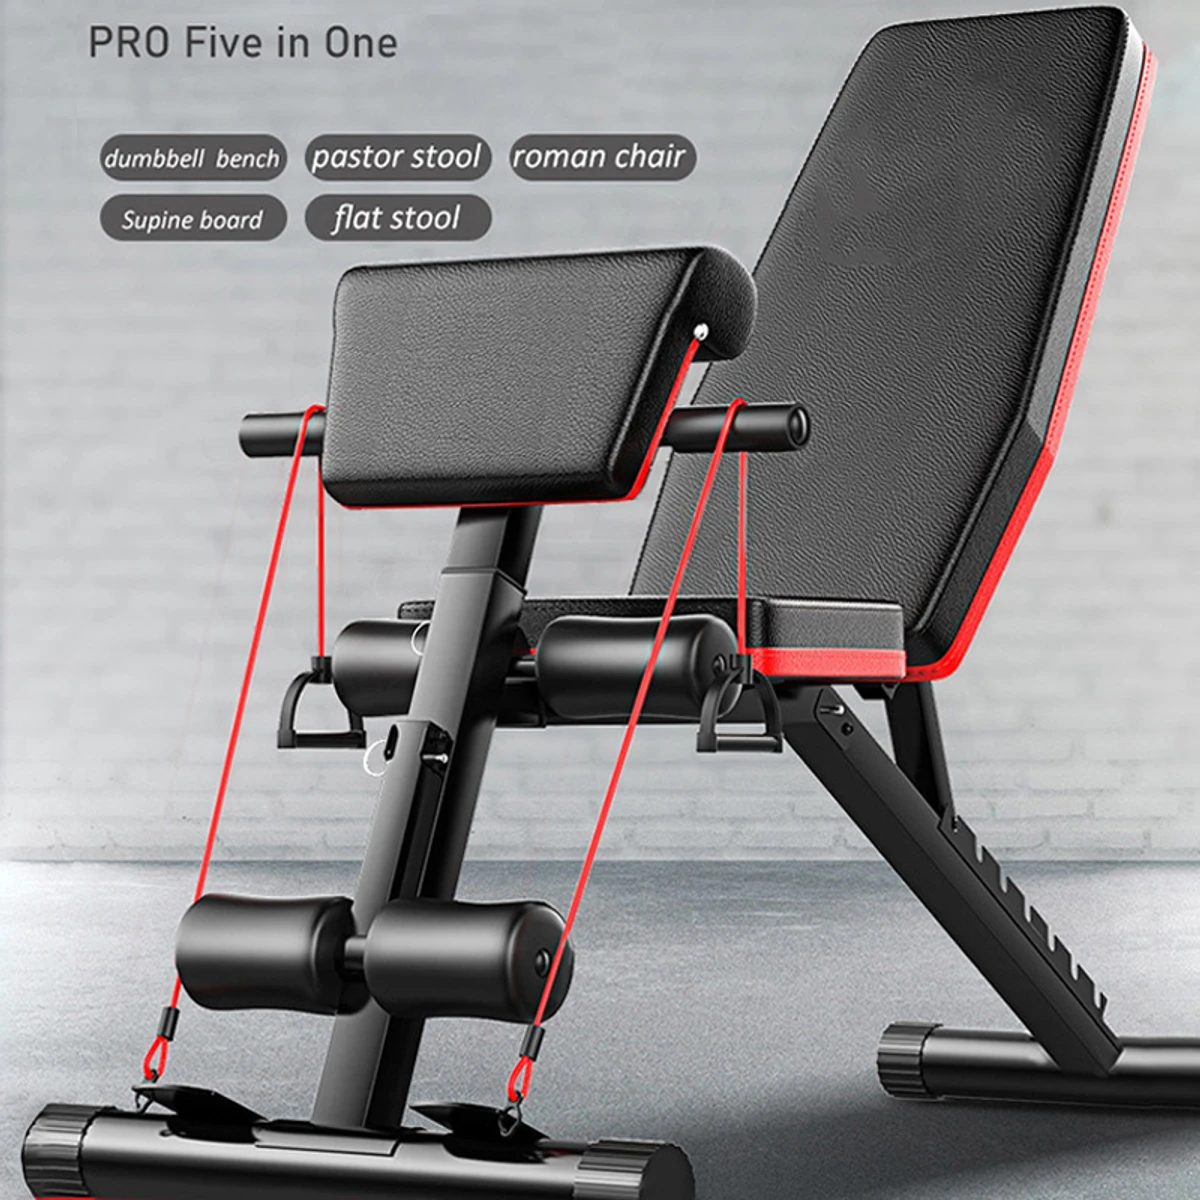 PRO 5-in-1 Adjustable Bench Press Foldable Gym Bench Weight Lifting Bench